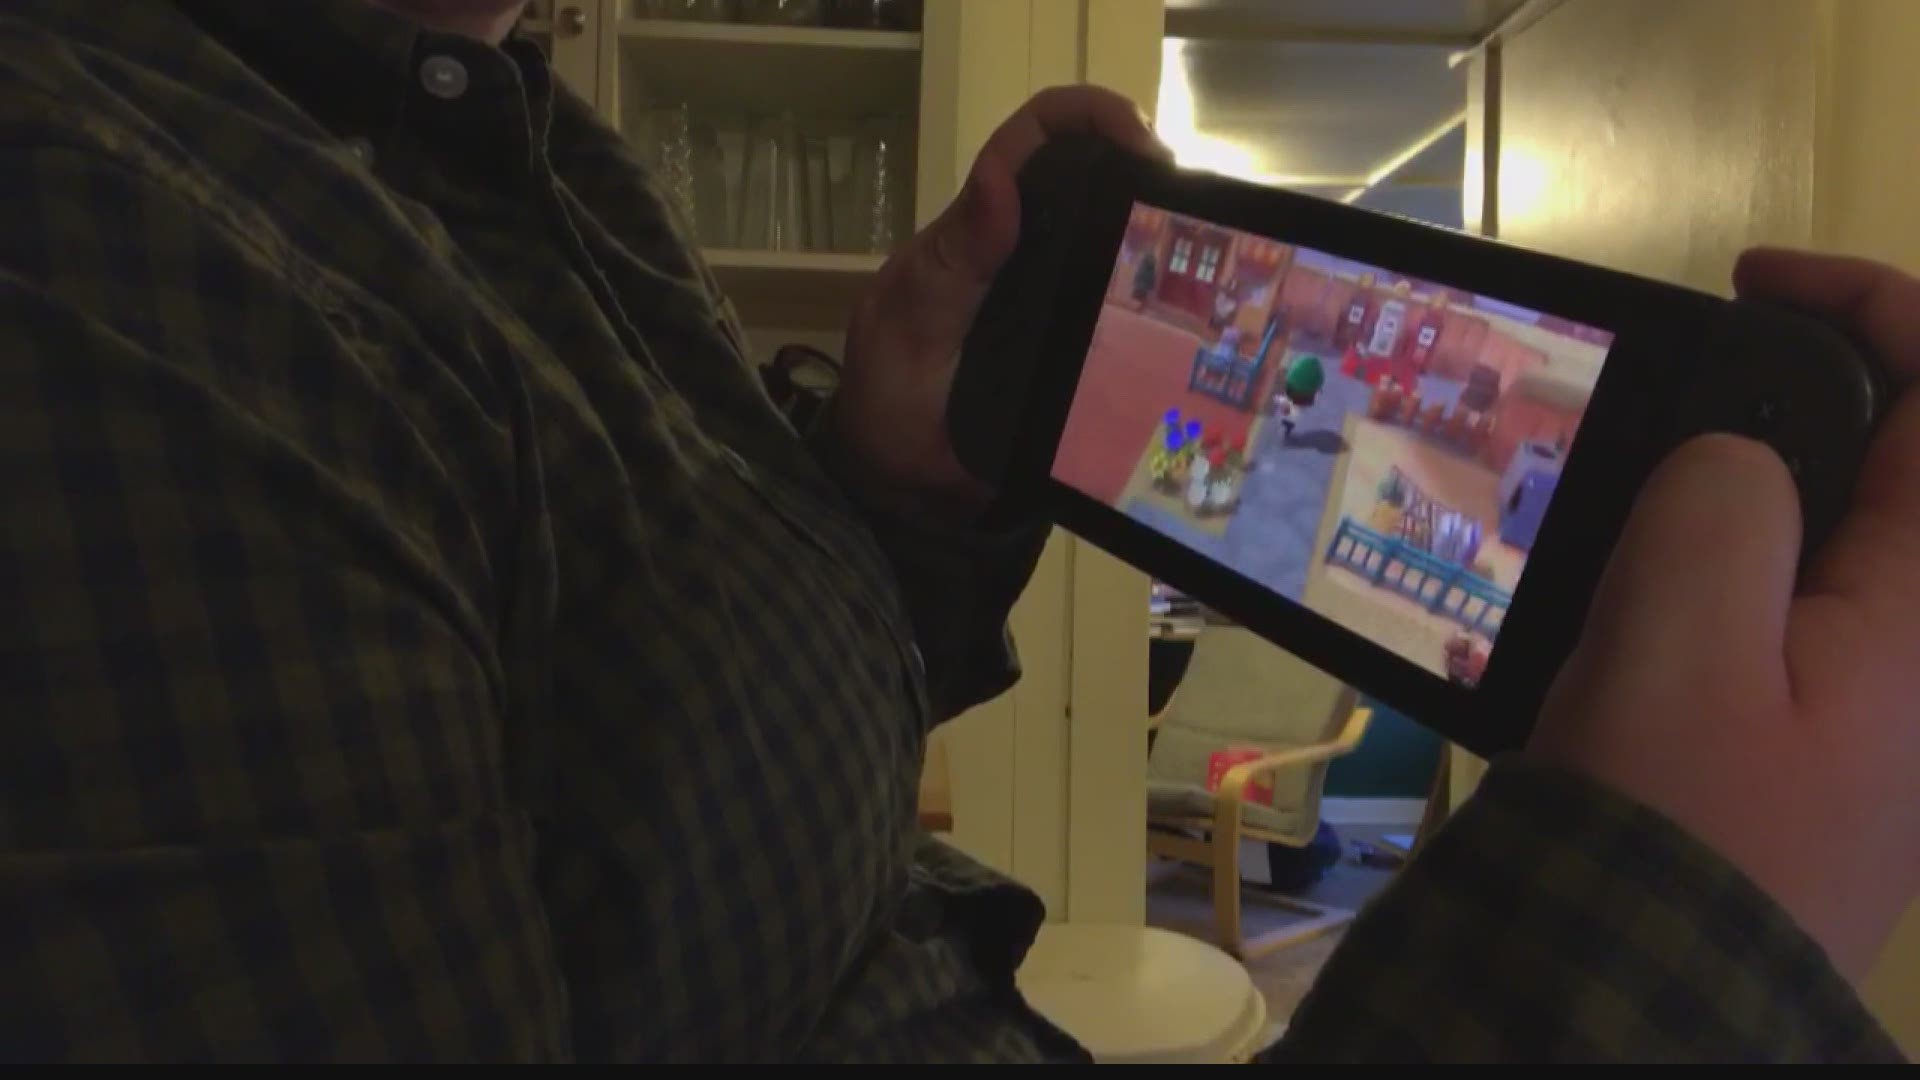 But a local expert says users should be aware of the risk of becoming addicted to gaming.